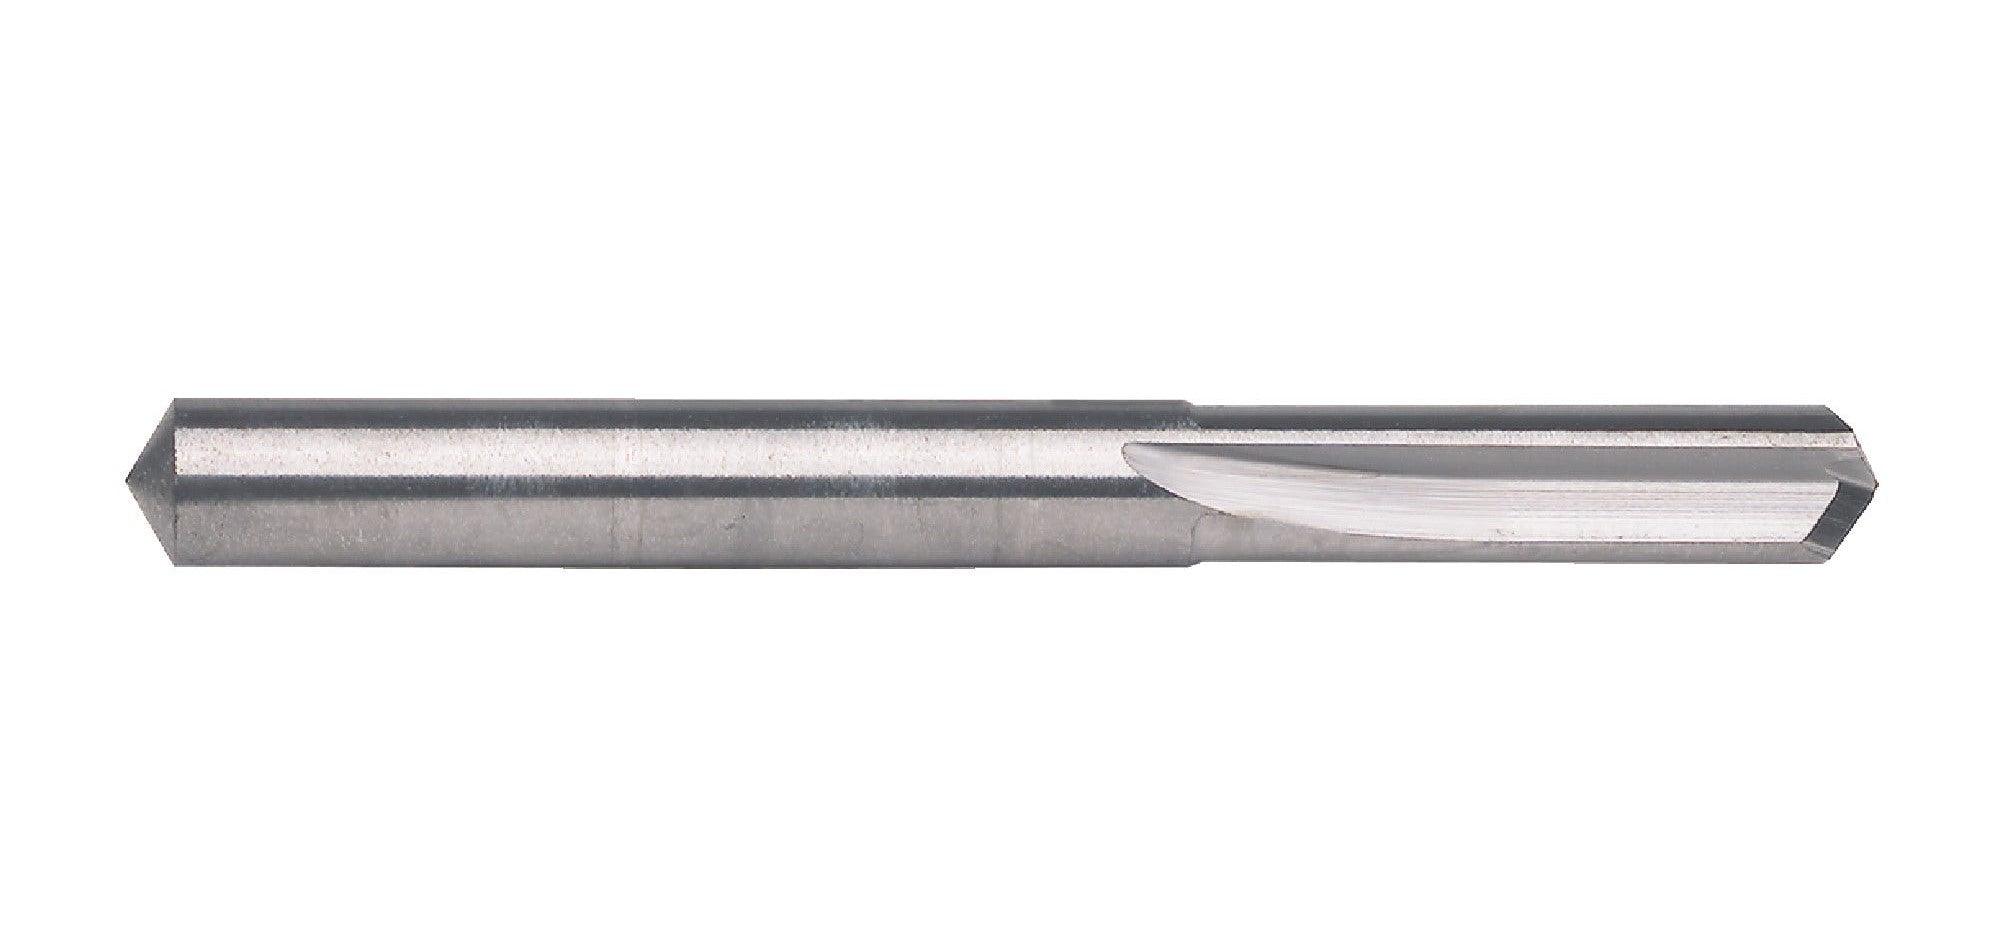 (10 PACK) 1/4" x 1-1/8" LOF x 4" OAL Straight Flute Carbide Drill Bit - The End Mill Store 